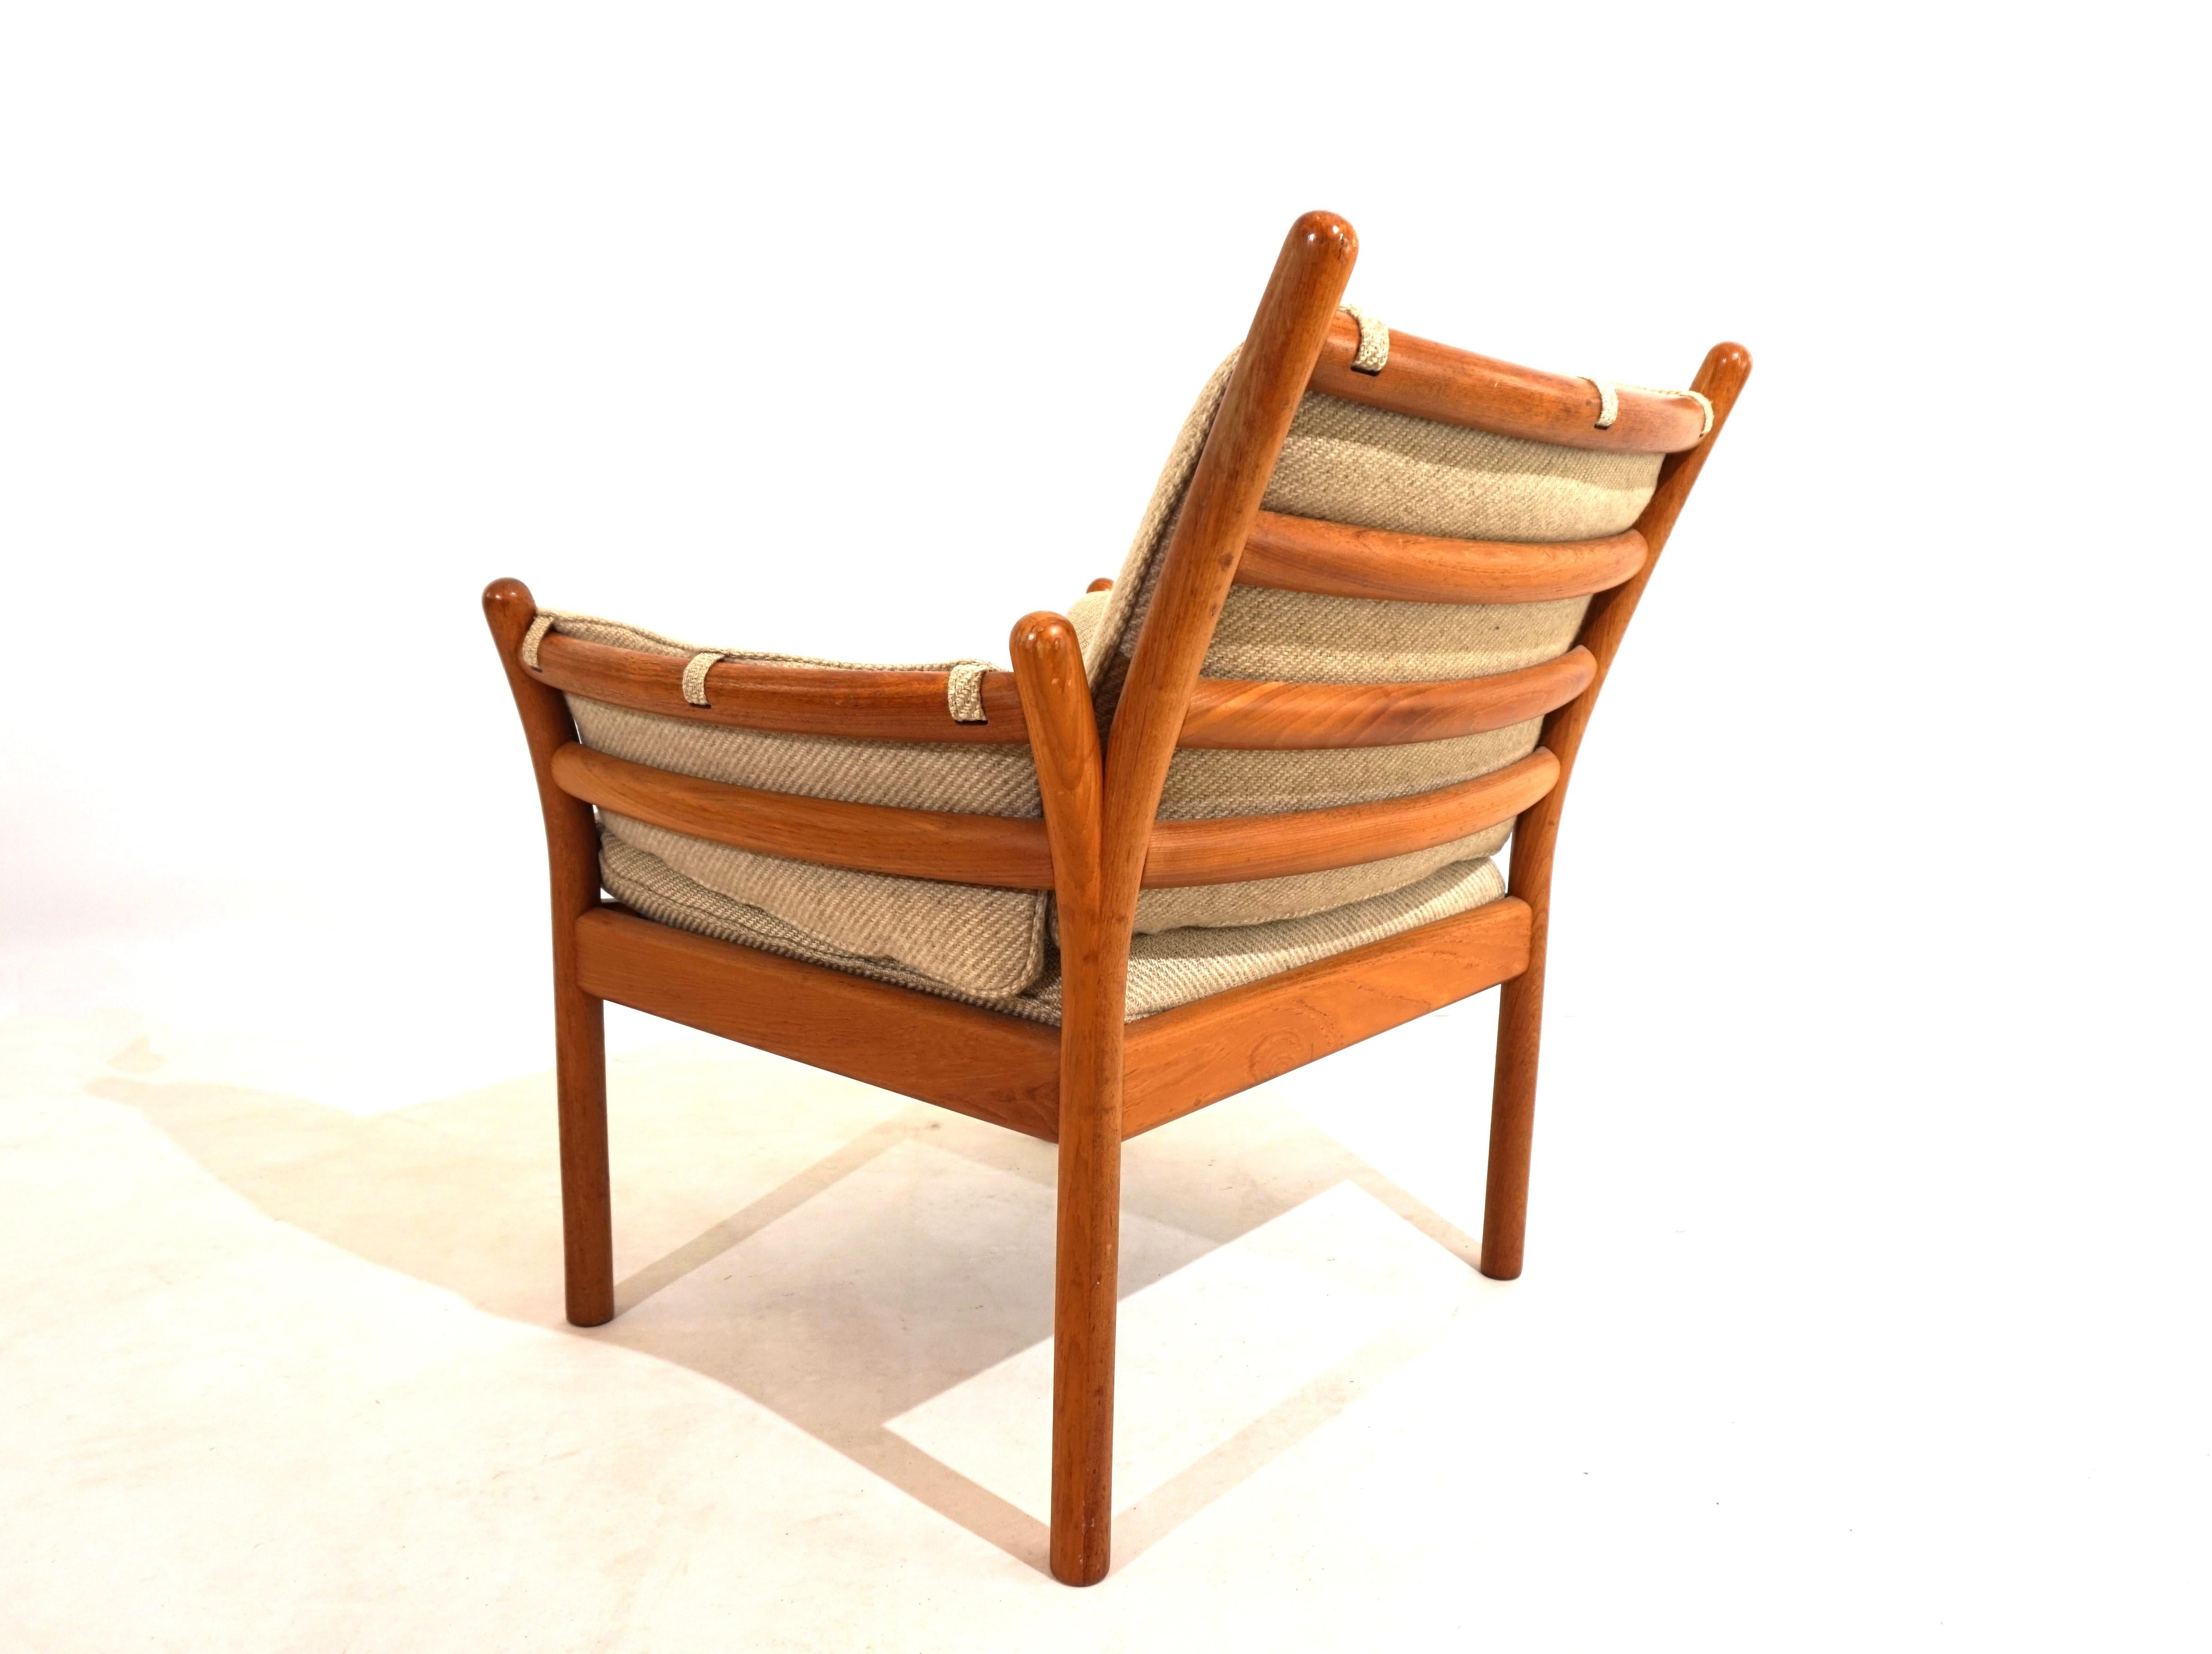 A Genius teak armchair in excellent condition from CFC Silkeborg. The attractive wooden frame with a very beautiful grain and a honey-colored color shows hardly any signs of wear. The covers, which are made from a beige brown wool fabric, are also